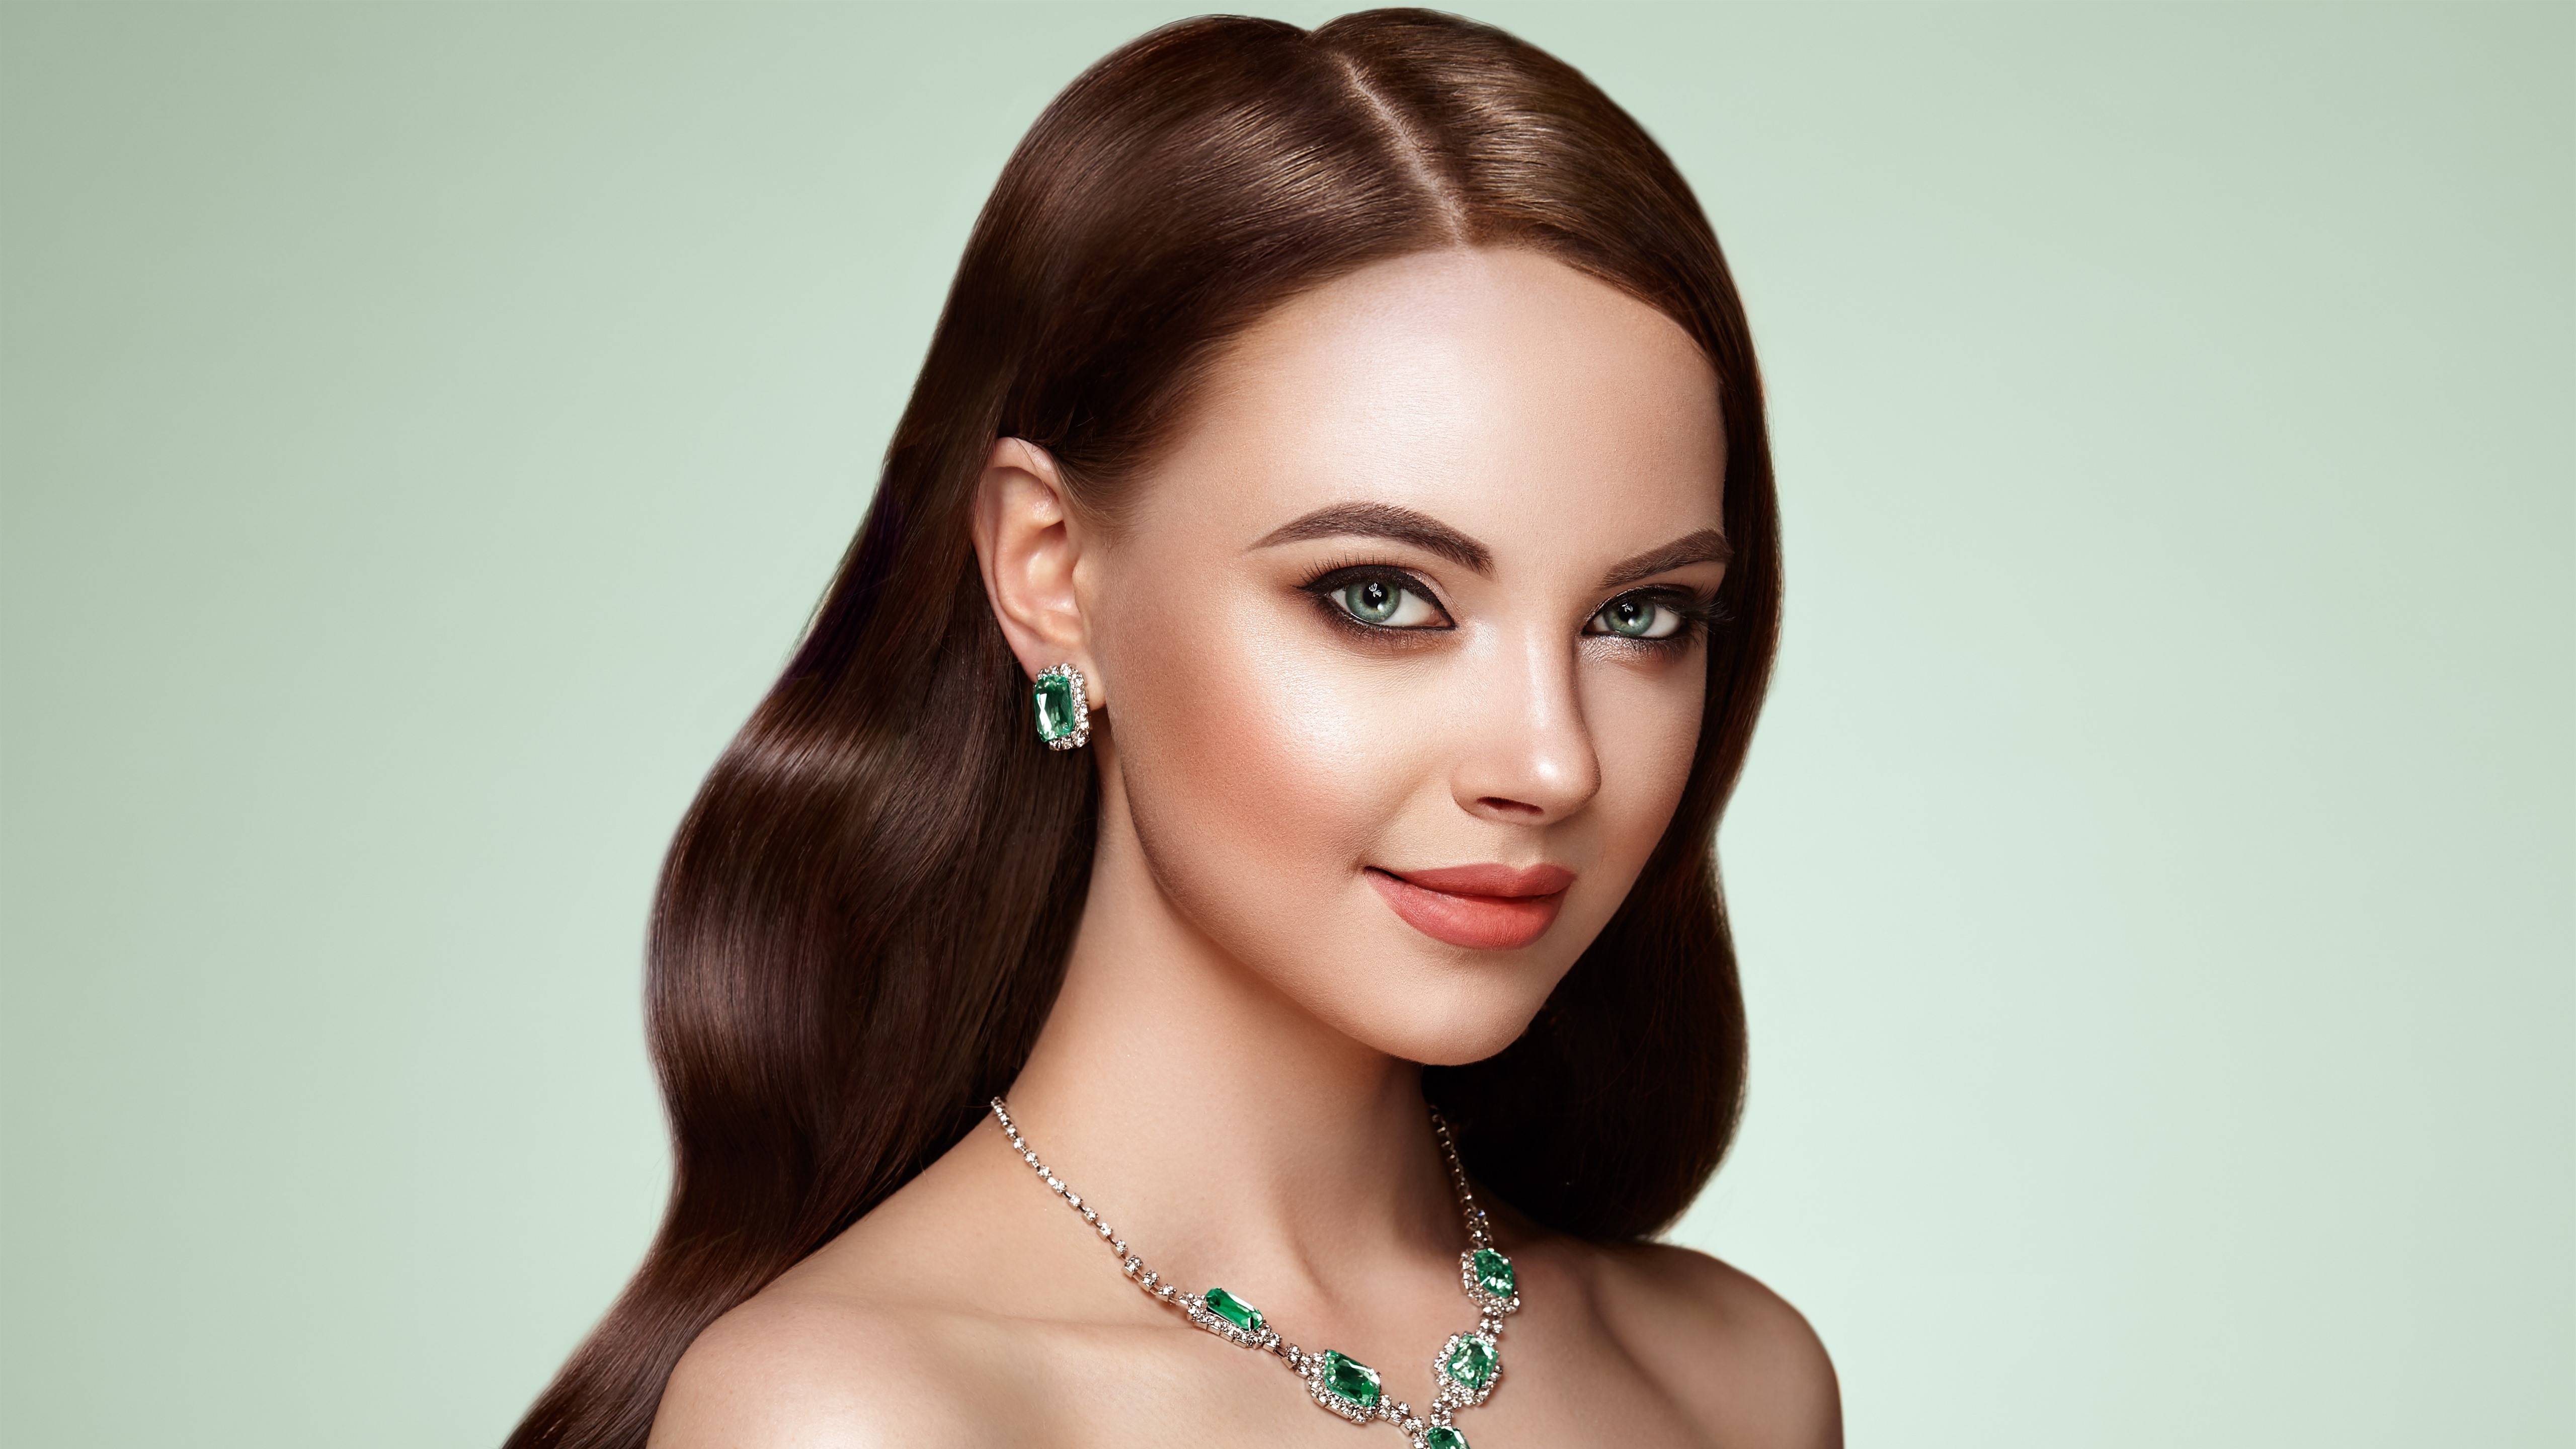 Wallpaper Fashion girl, green eyes, brown hair, necklace 5120x2880 UHD 5K Picture, Image